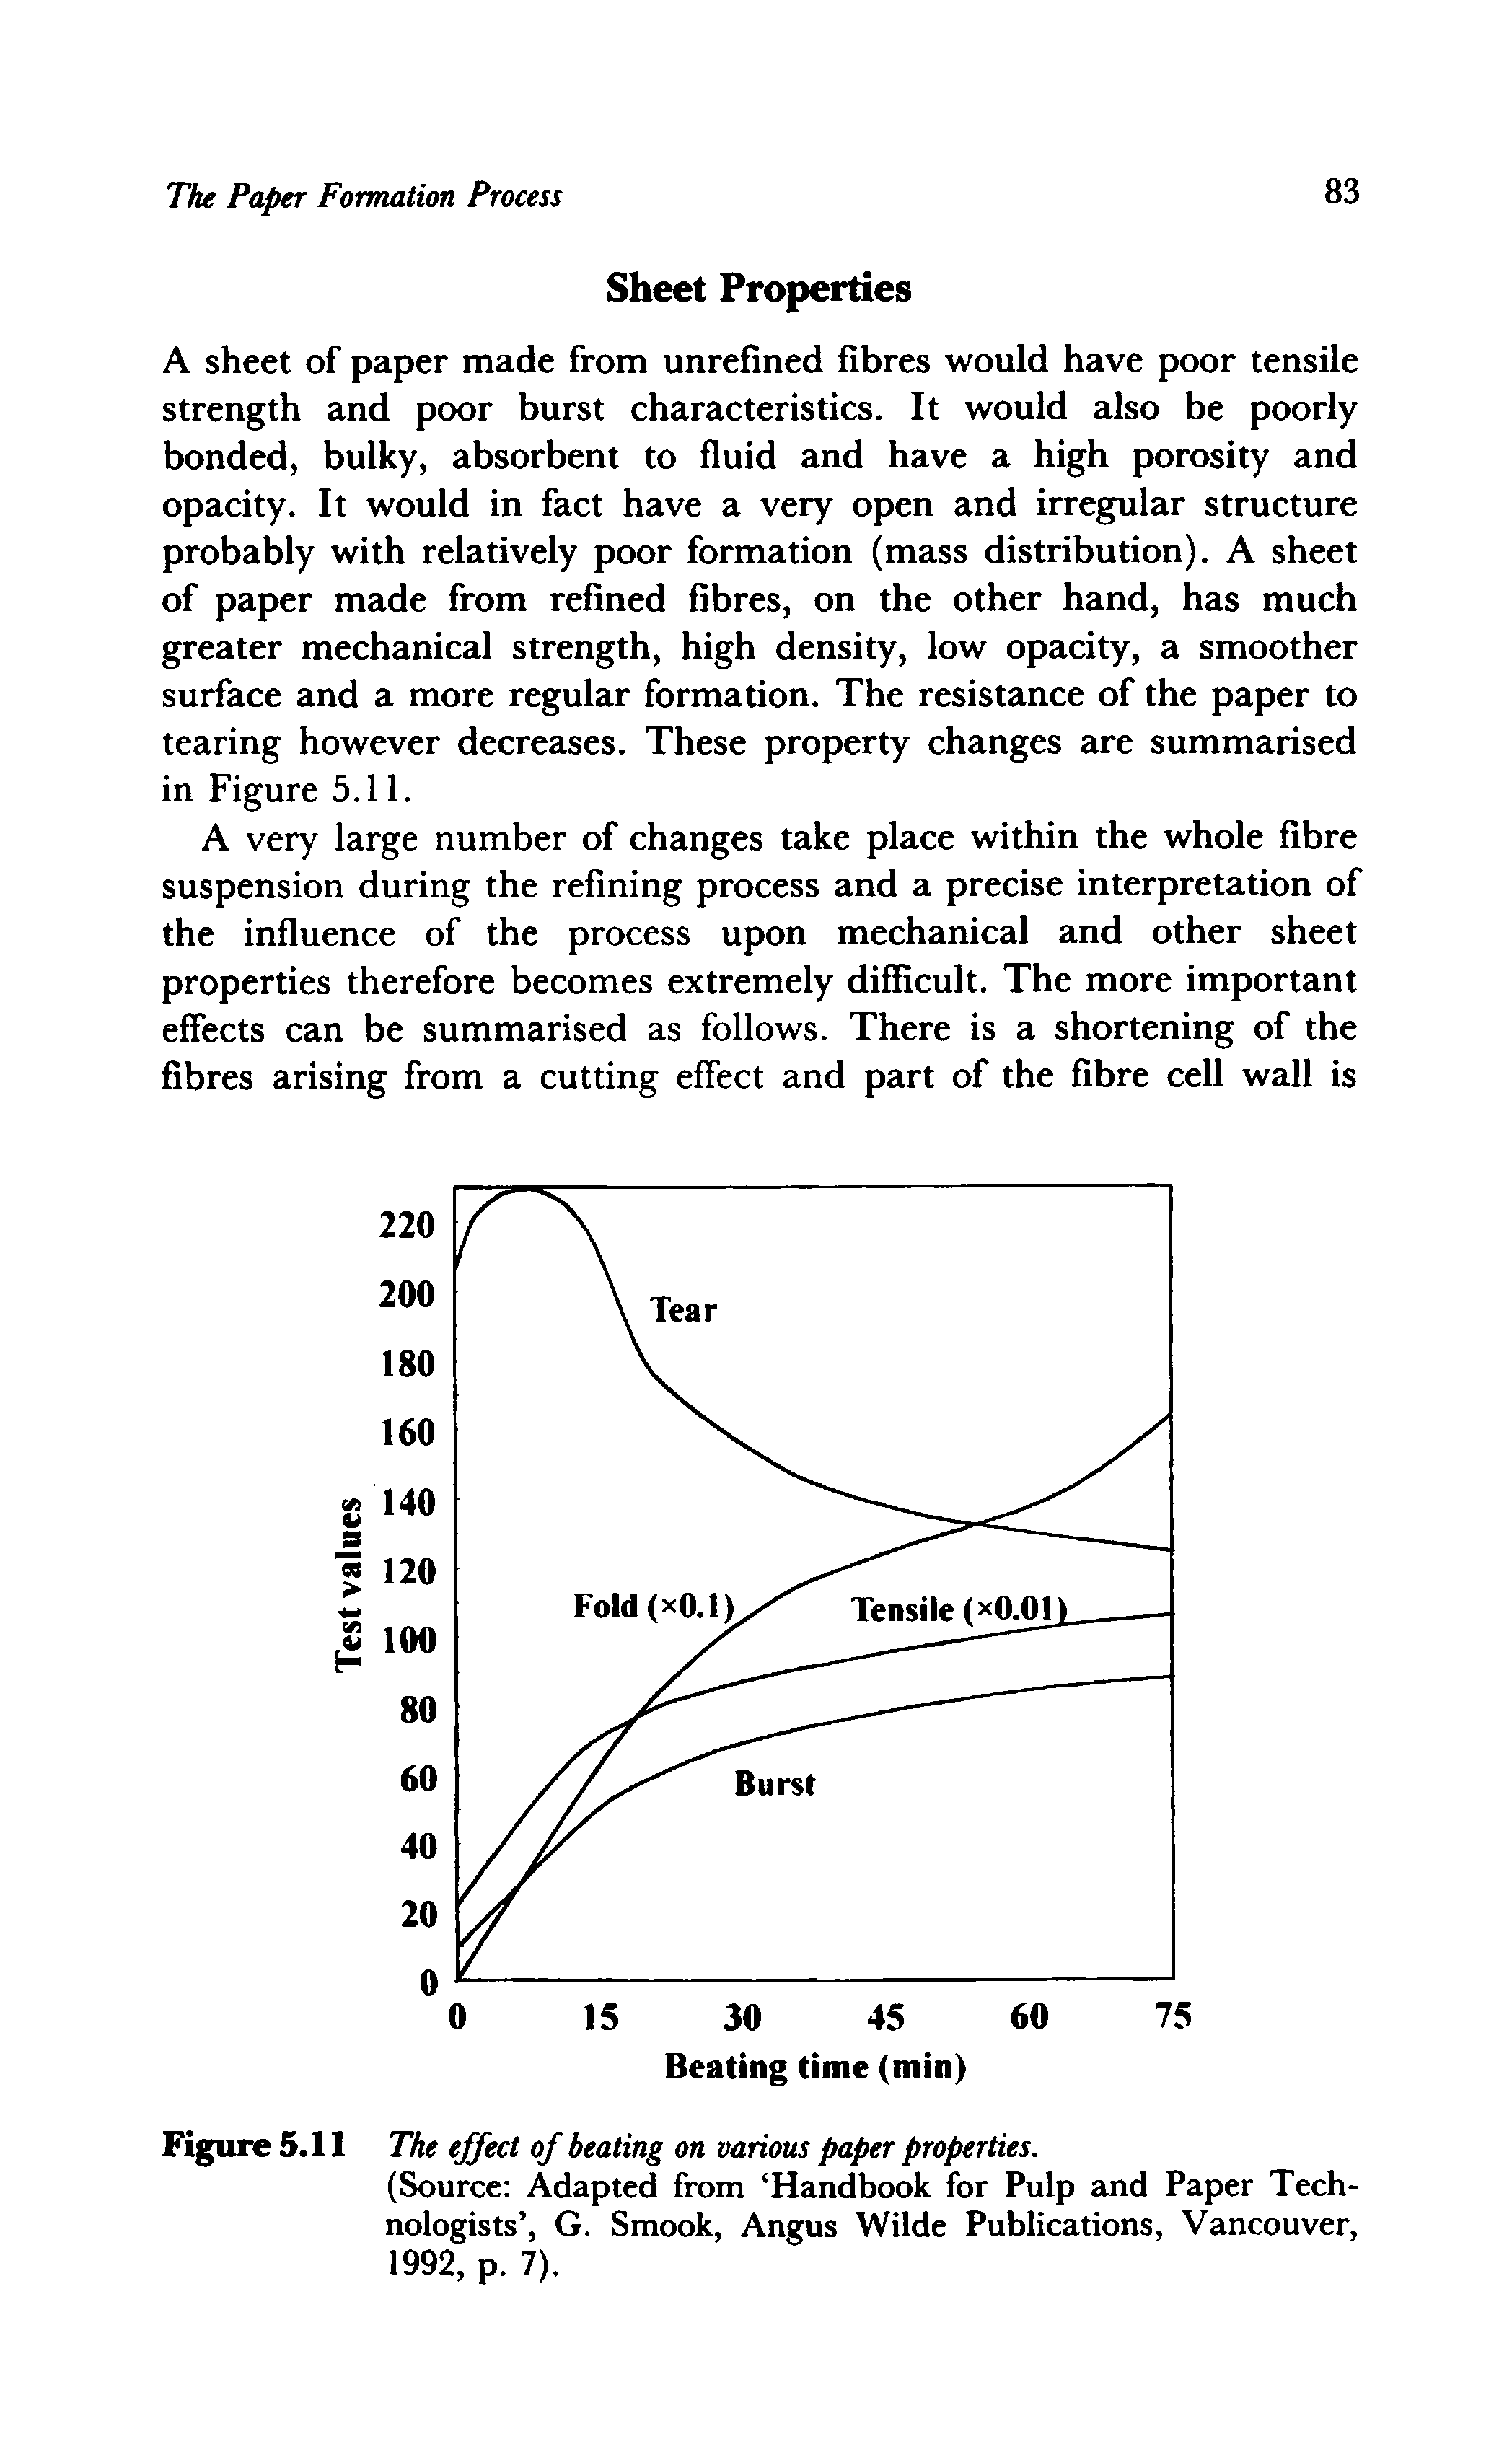 Figure 5.11 The effect of beating on various paper properties.